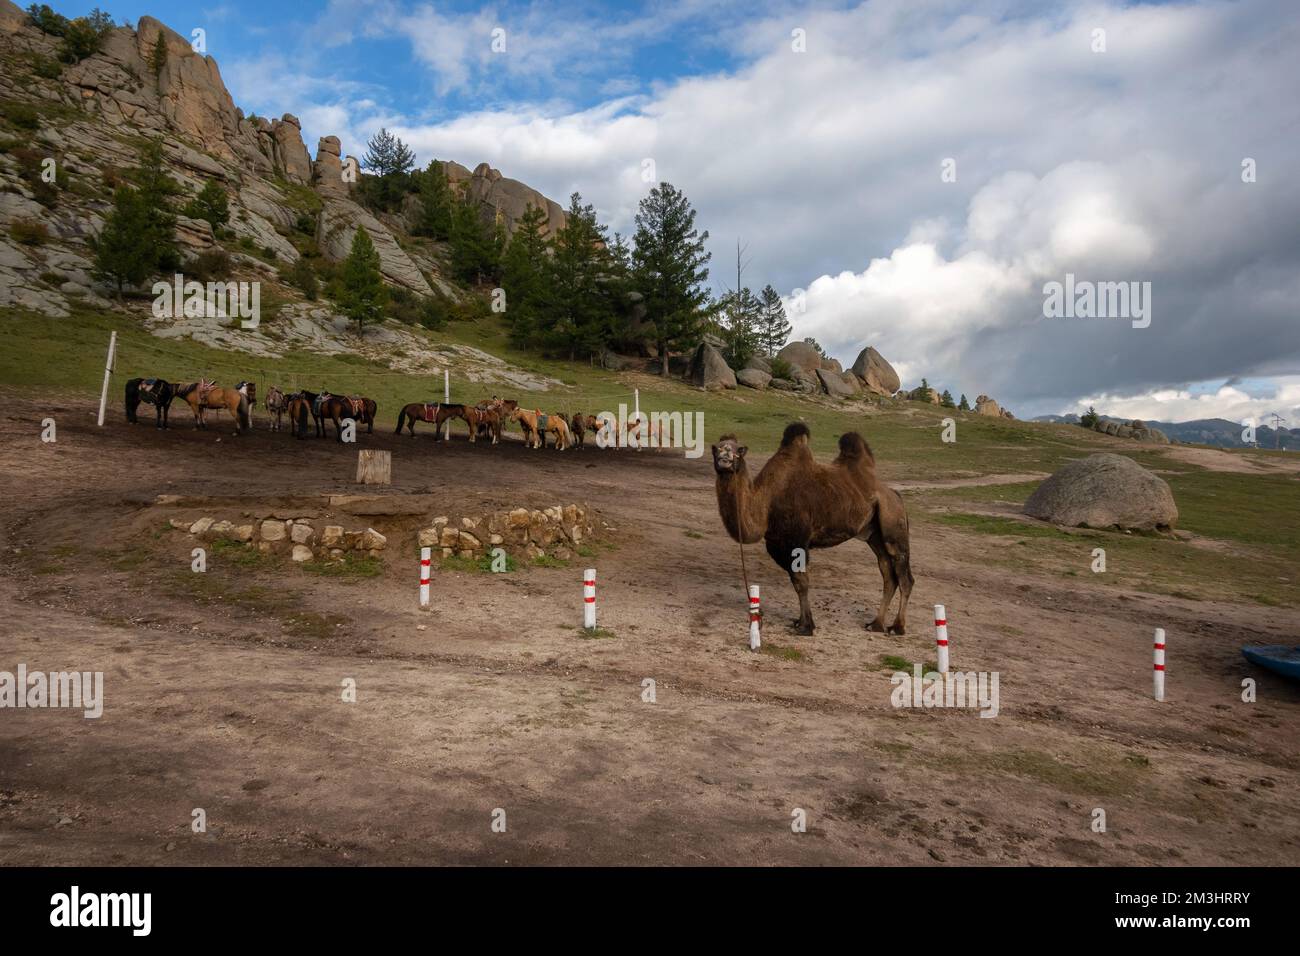 Farm animals standing outside in Mongolian countryside. Cows and a camel on a foothill in rural Mongolia. Stock Photo